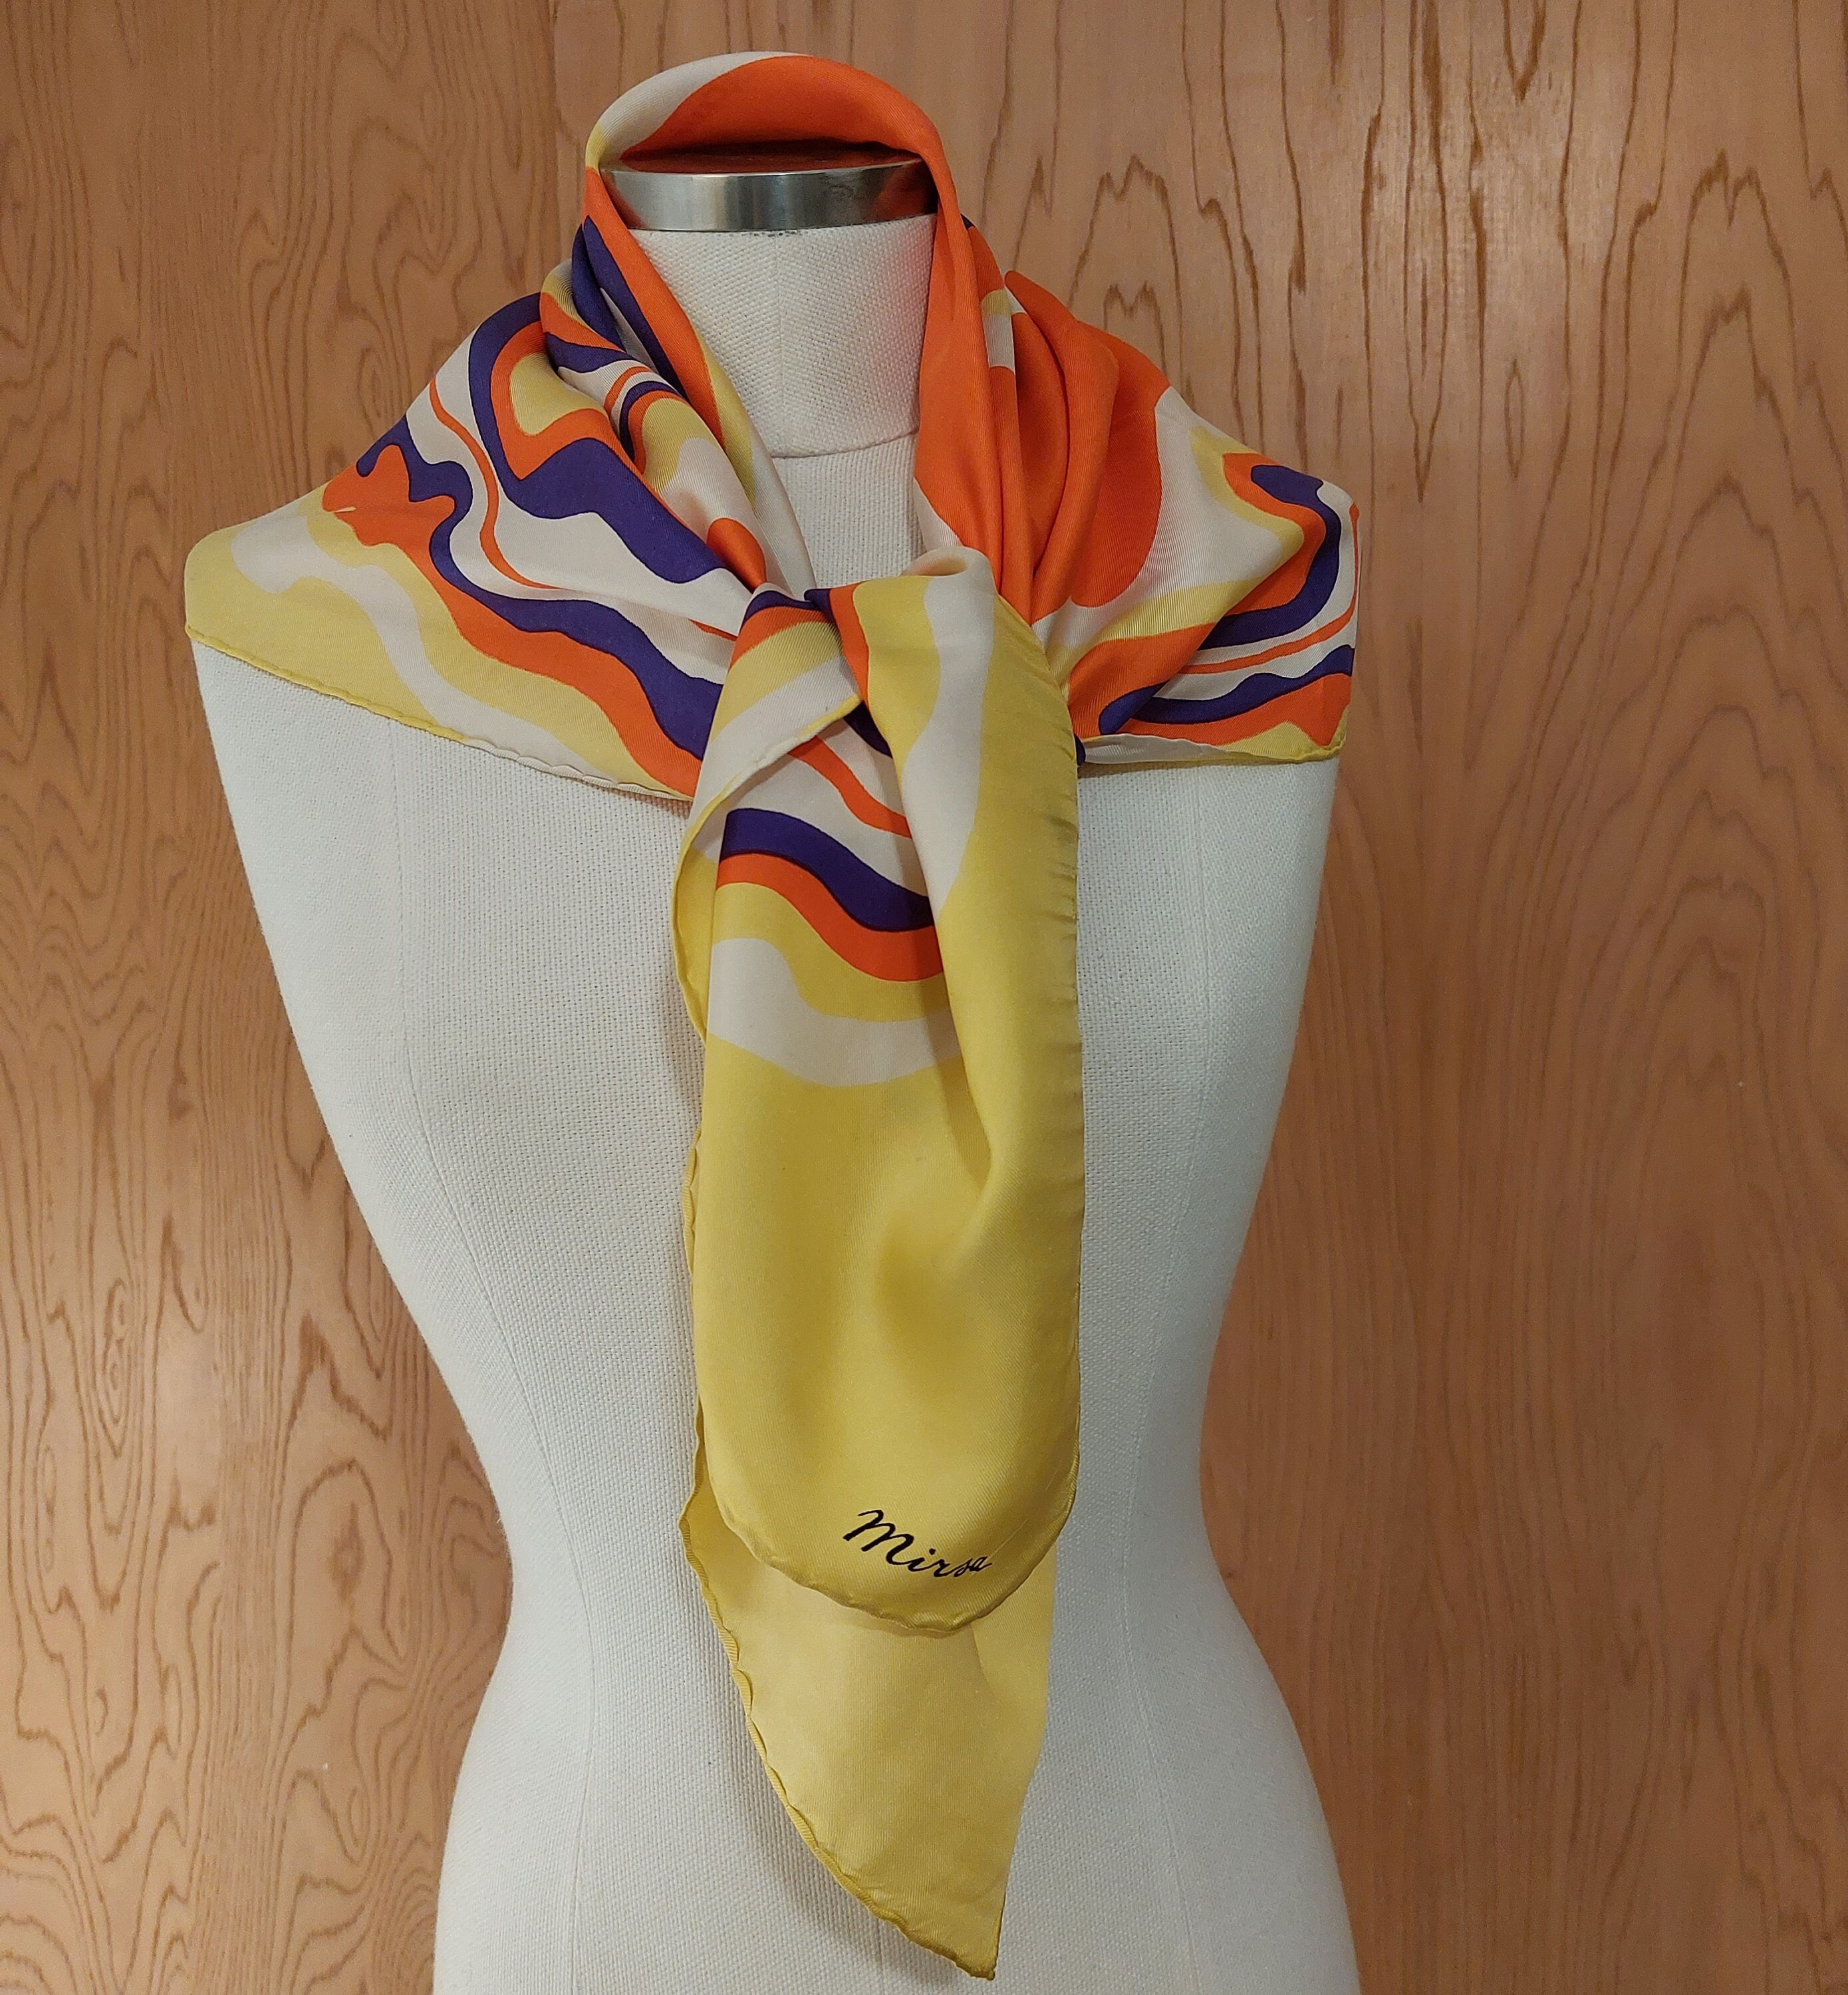 Italian Silk Scarves with Vintage Pin Up Girls Design - Bold Stripes